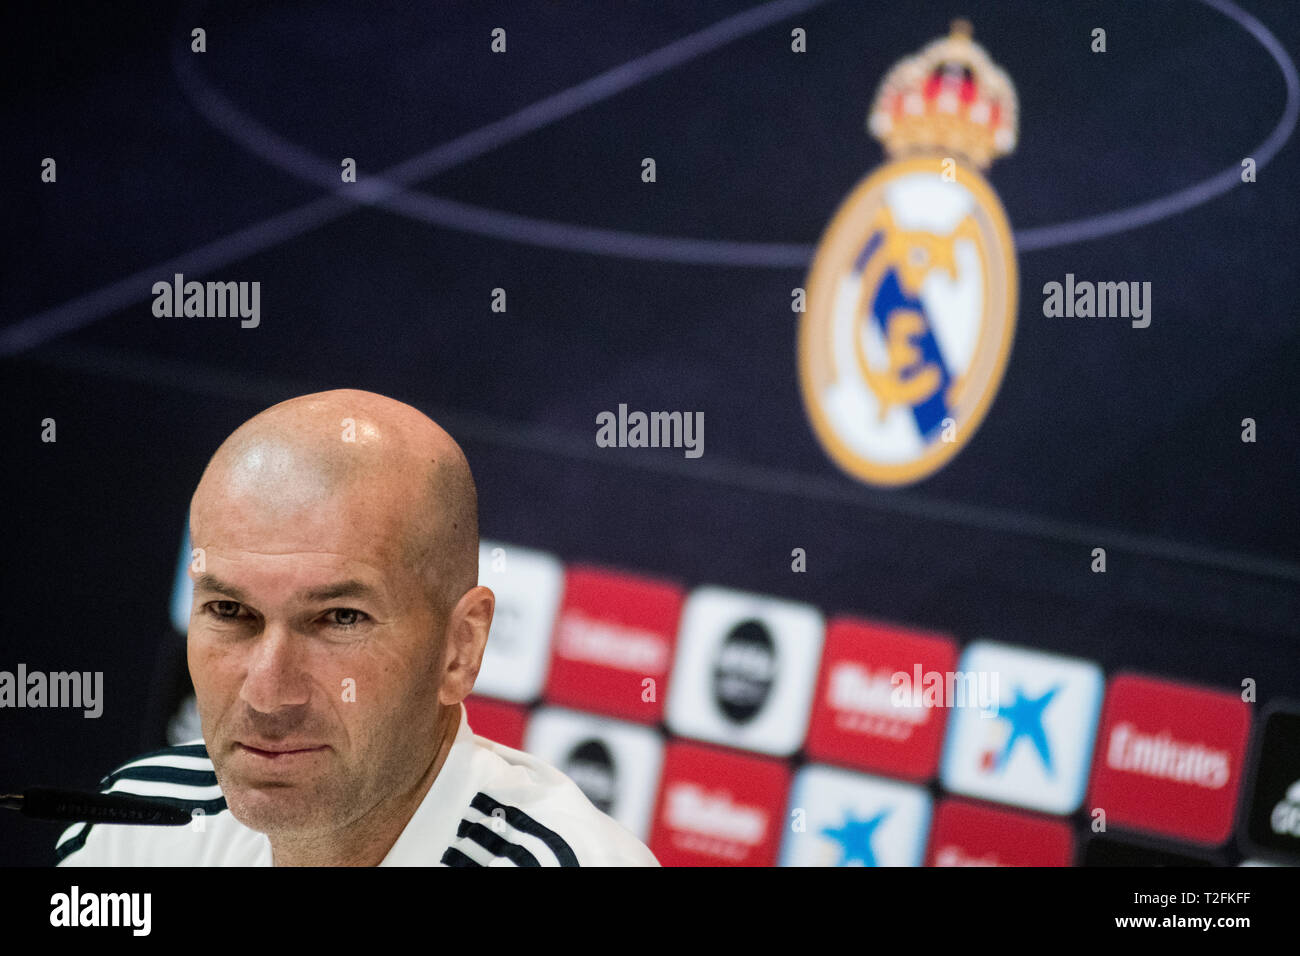 Madrid, Spain. 2nd Apr, 2019. Real Madrid coach Zinedine Zidane during a press conference ahead of La Liga match against Valencia C.F. Credit: Marcos del Mazo/Alamy Live News Stock Photo